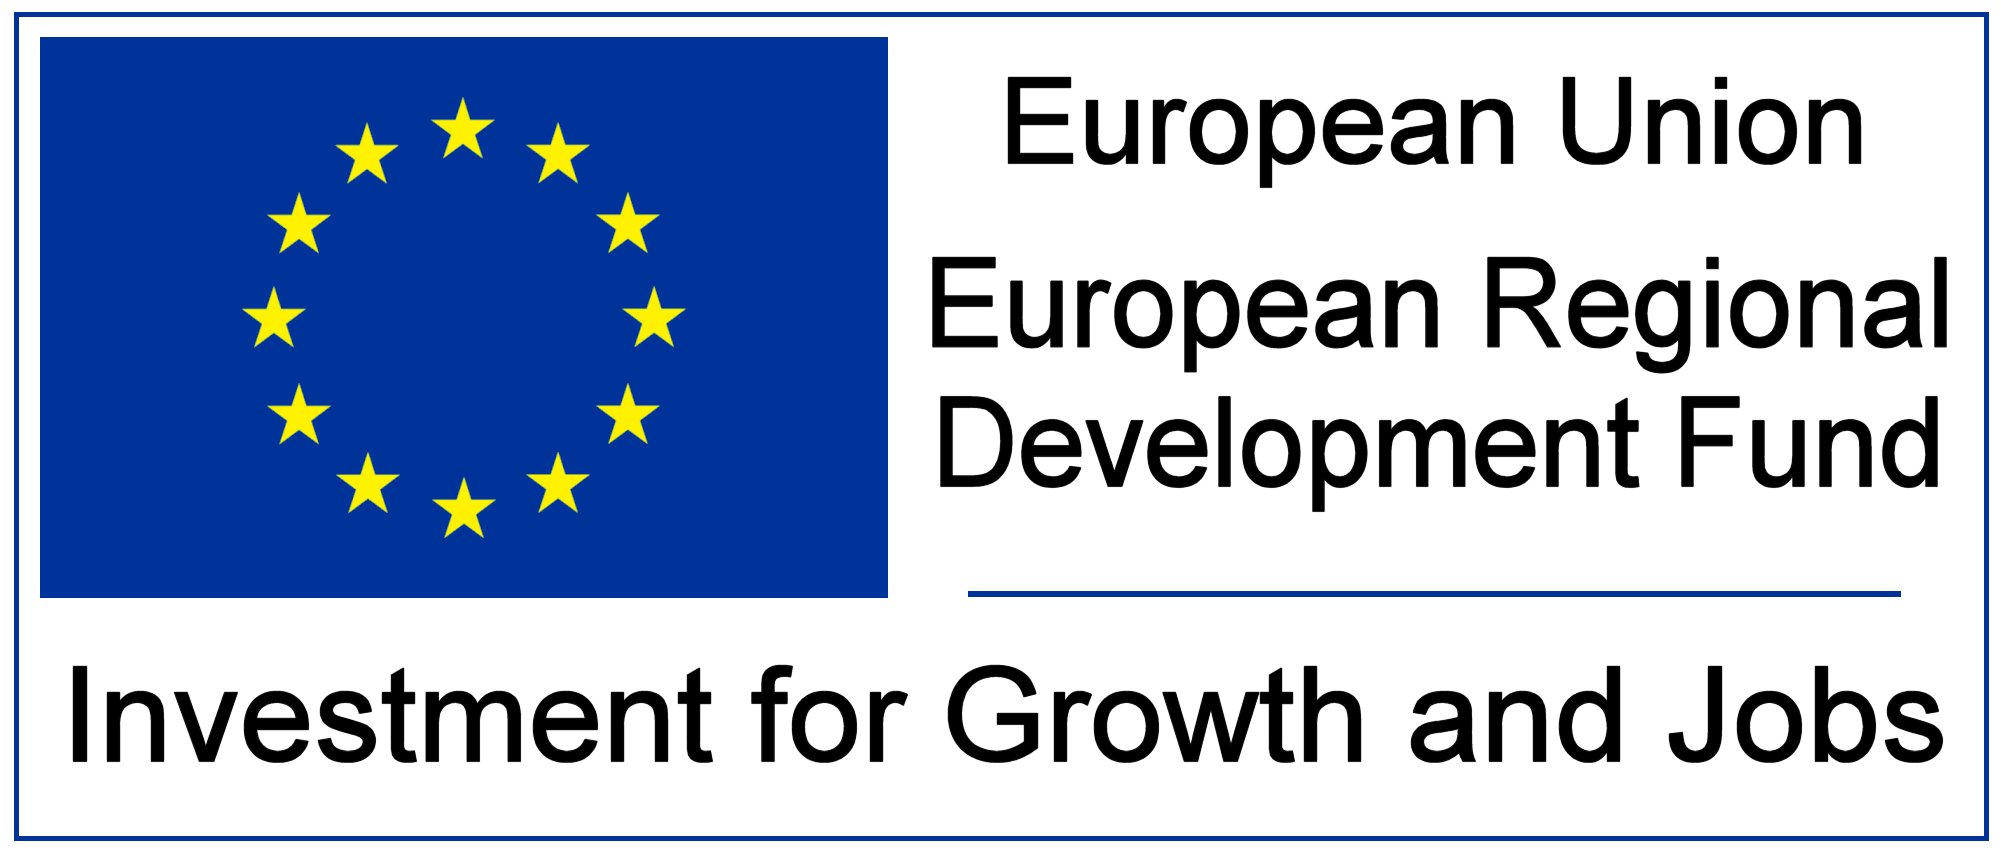 European Regional Development Fund | Investment for Growth and Jobs Logo